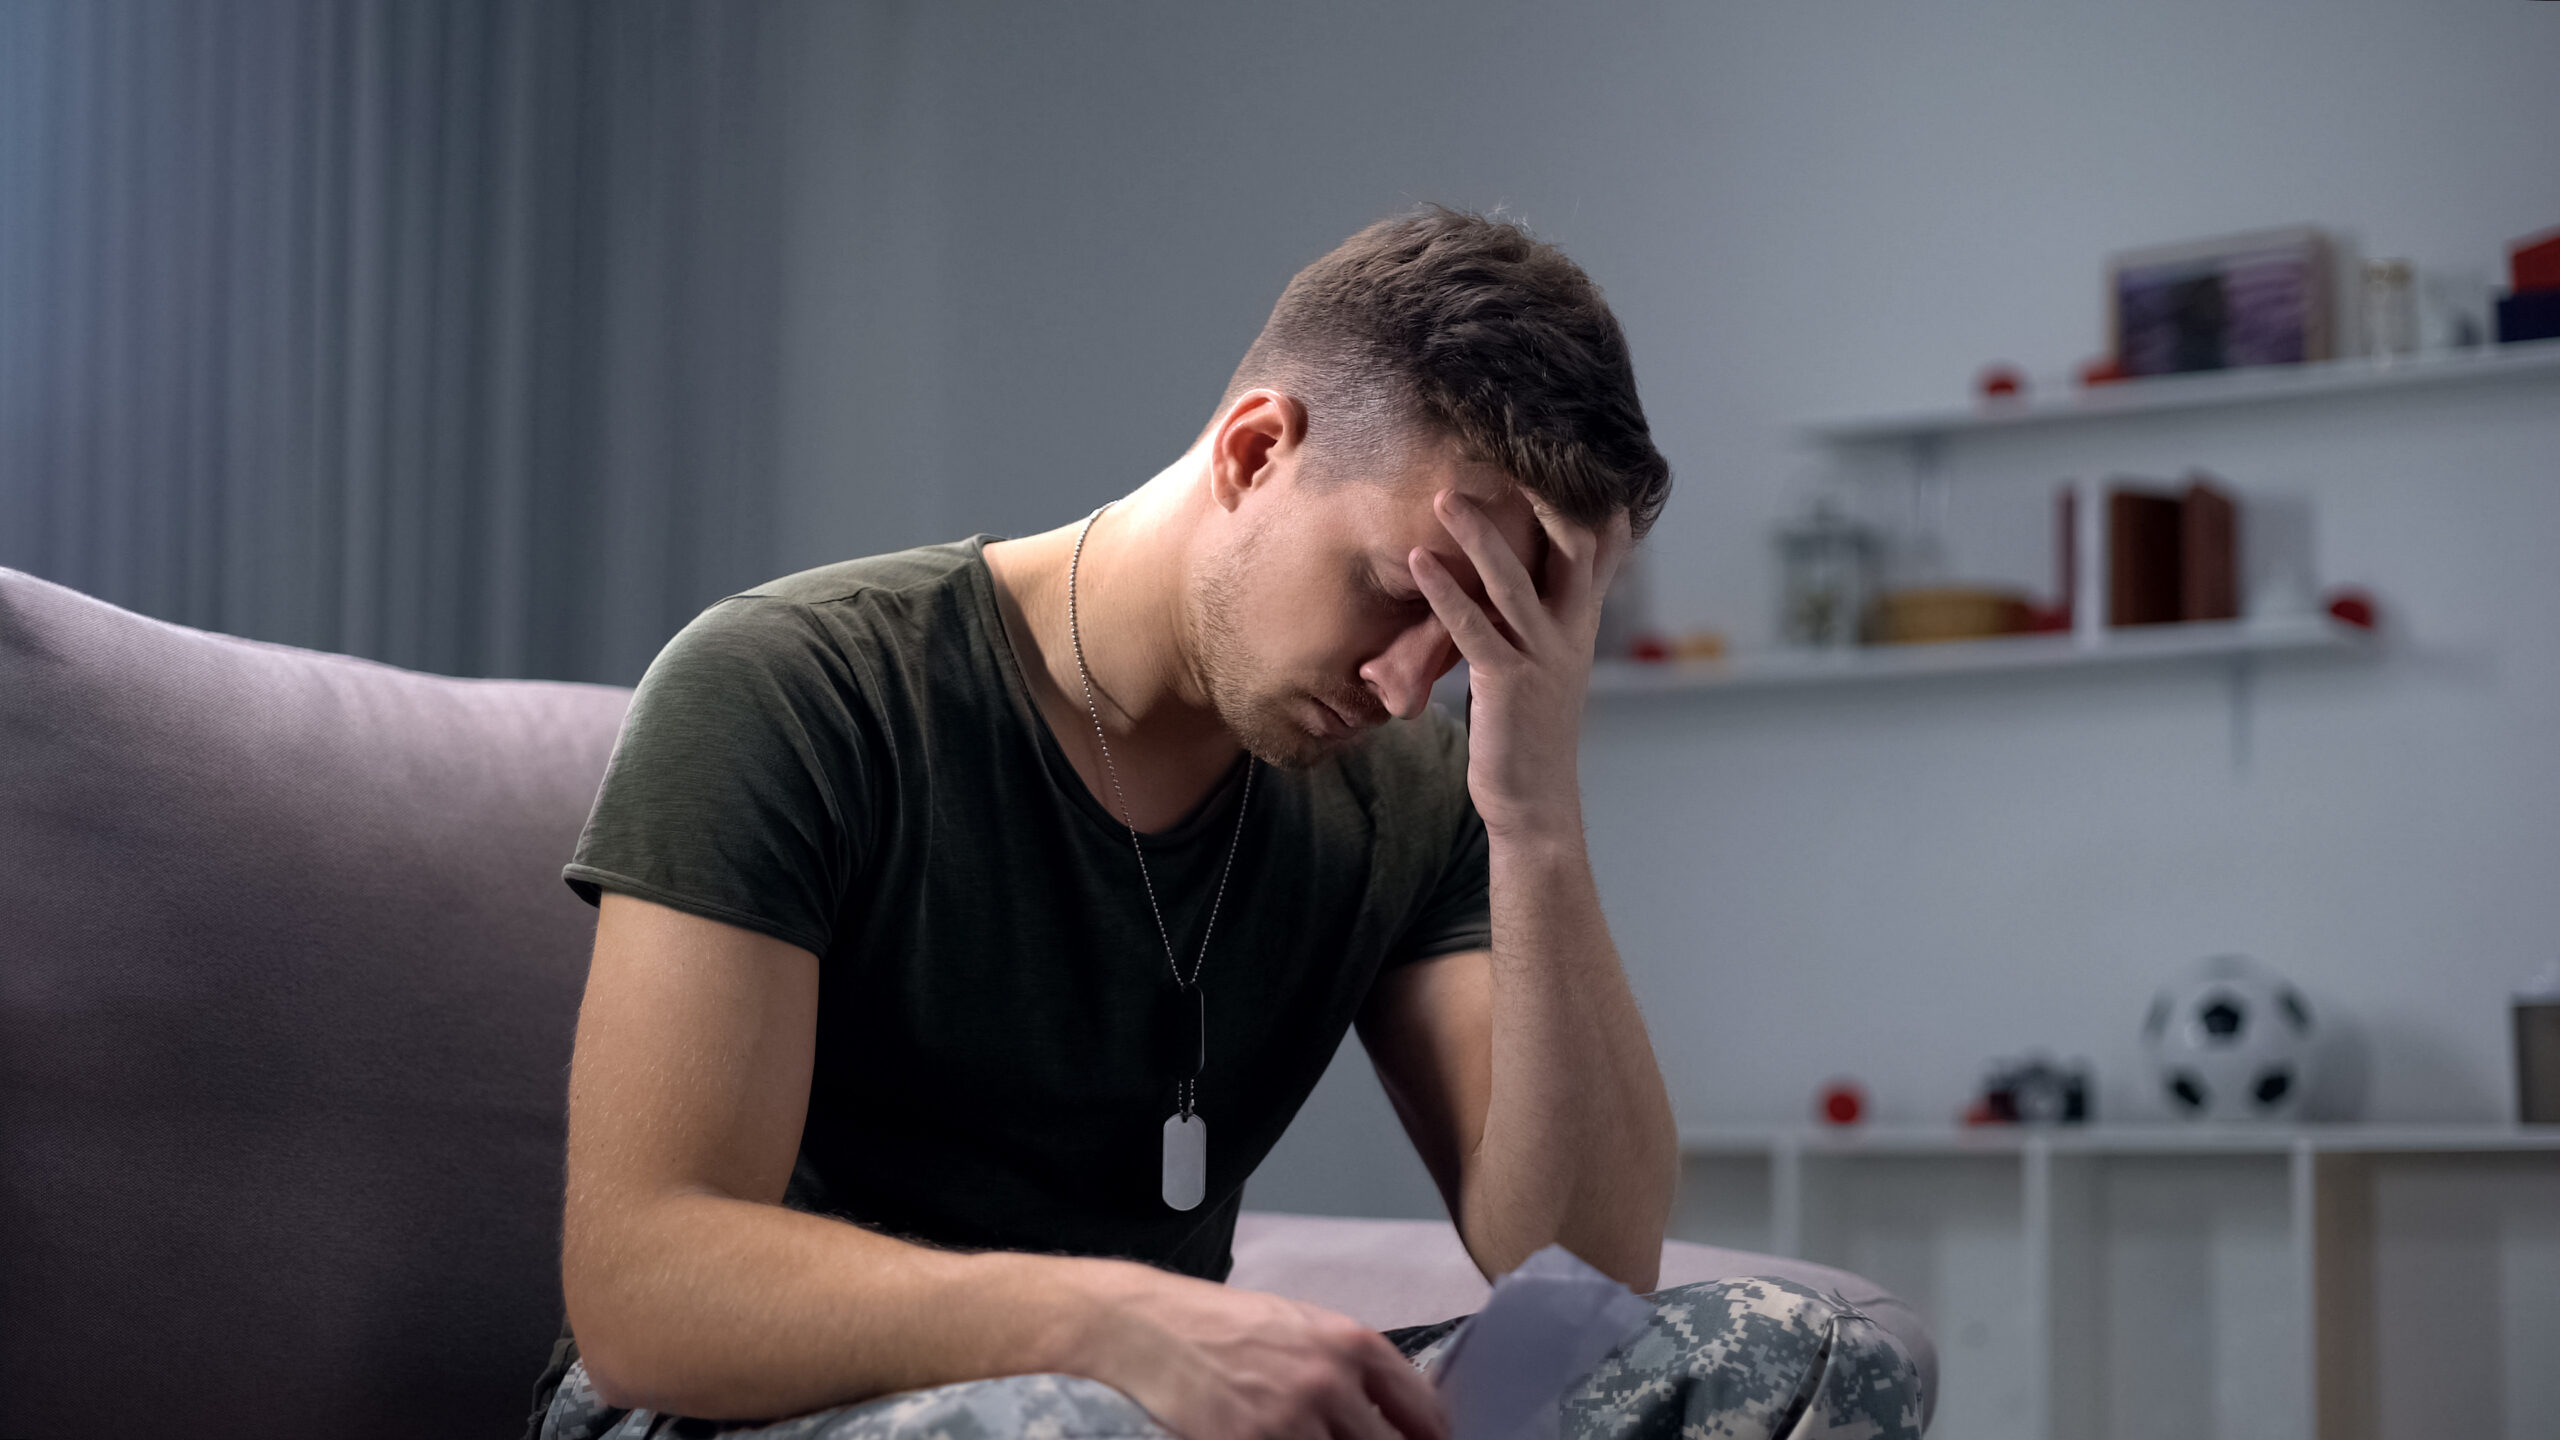 Depressed soldier holding photo, suffering from news of impending divorce from spouse while he was away during his service.